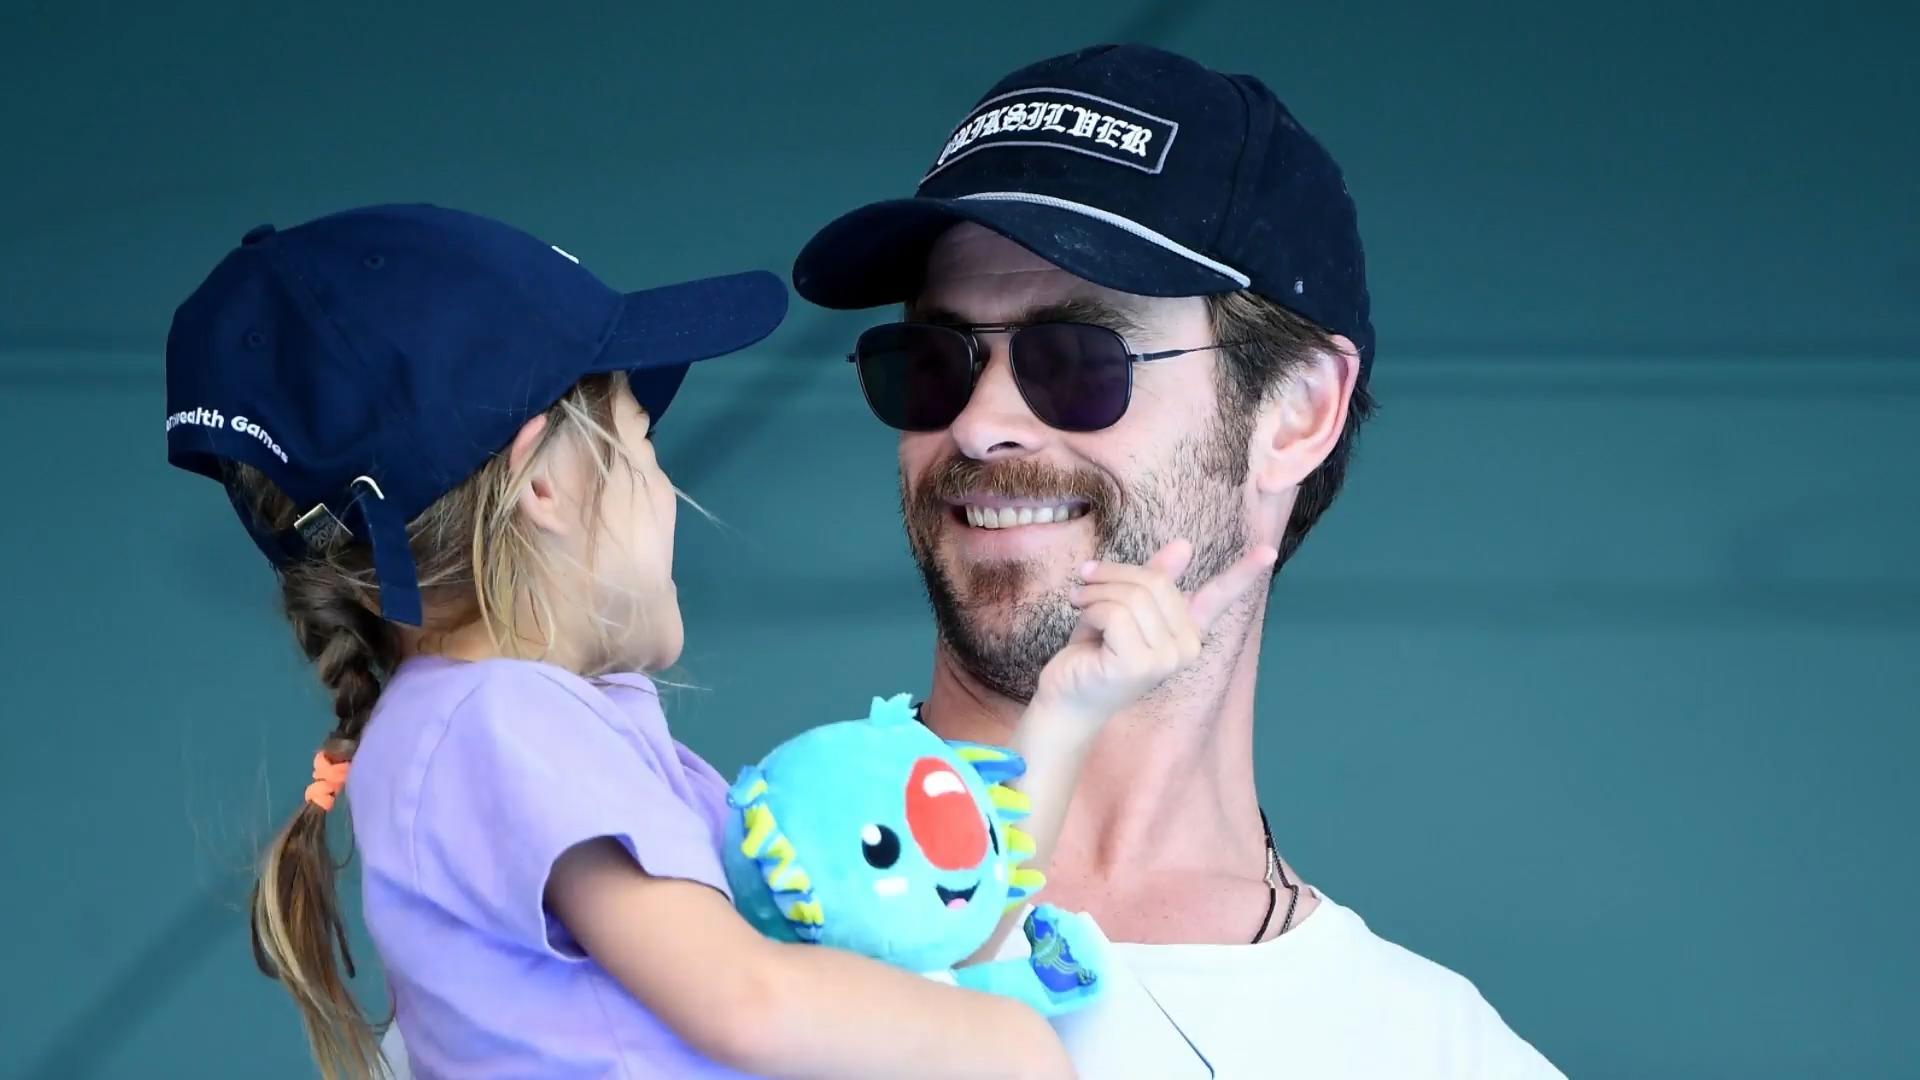 Chris Hemsworth Enjoys Time Skating With His Son After Alzheimer's Shock